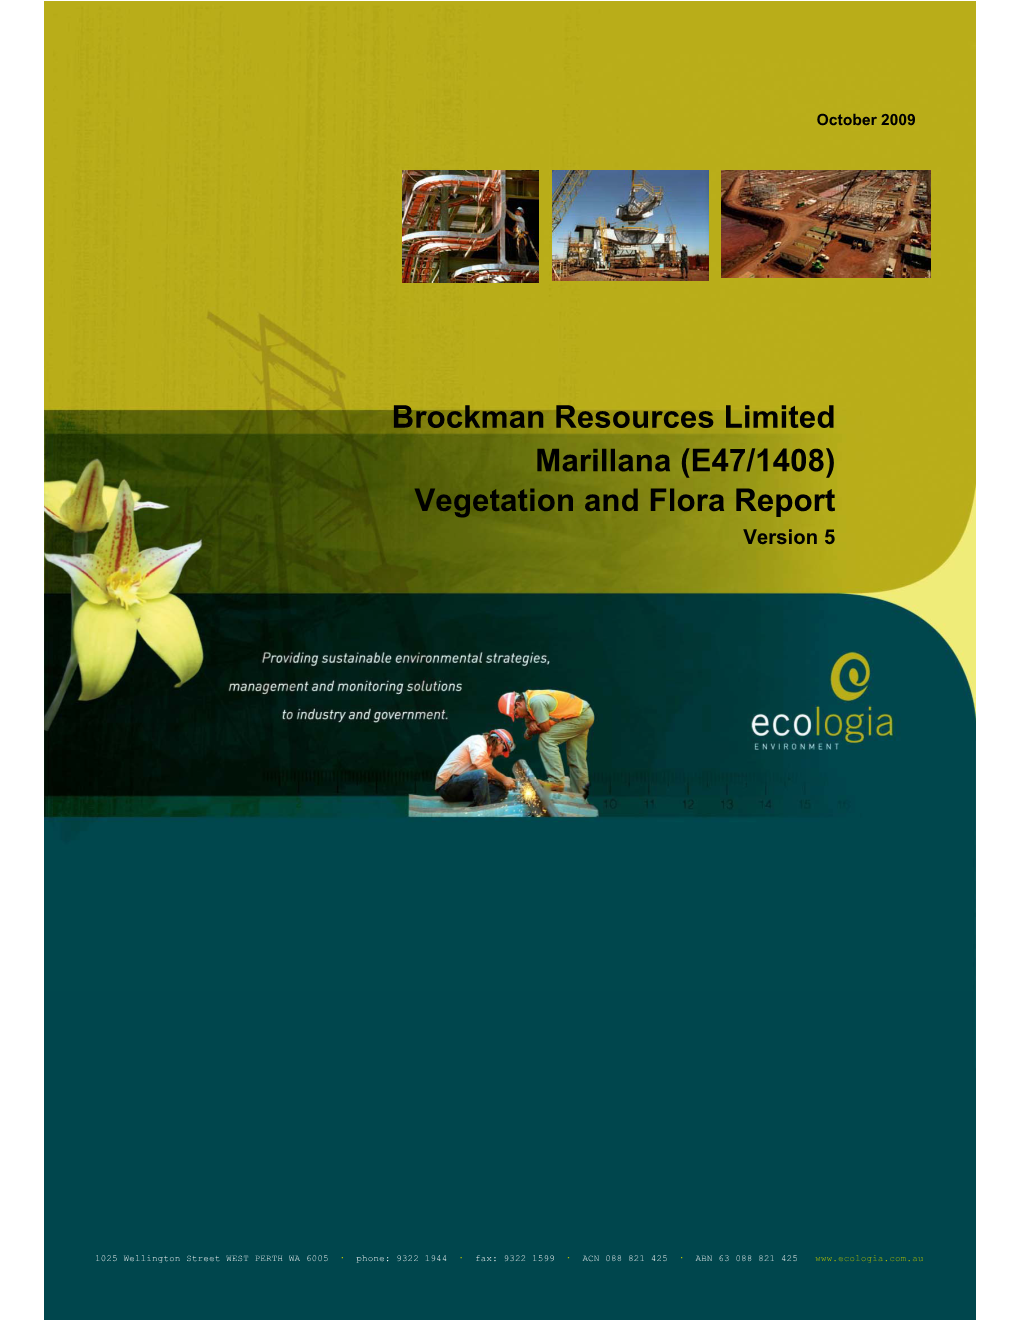 MARILLANA VEGETATION and FLORA REPORT Table of Contents